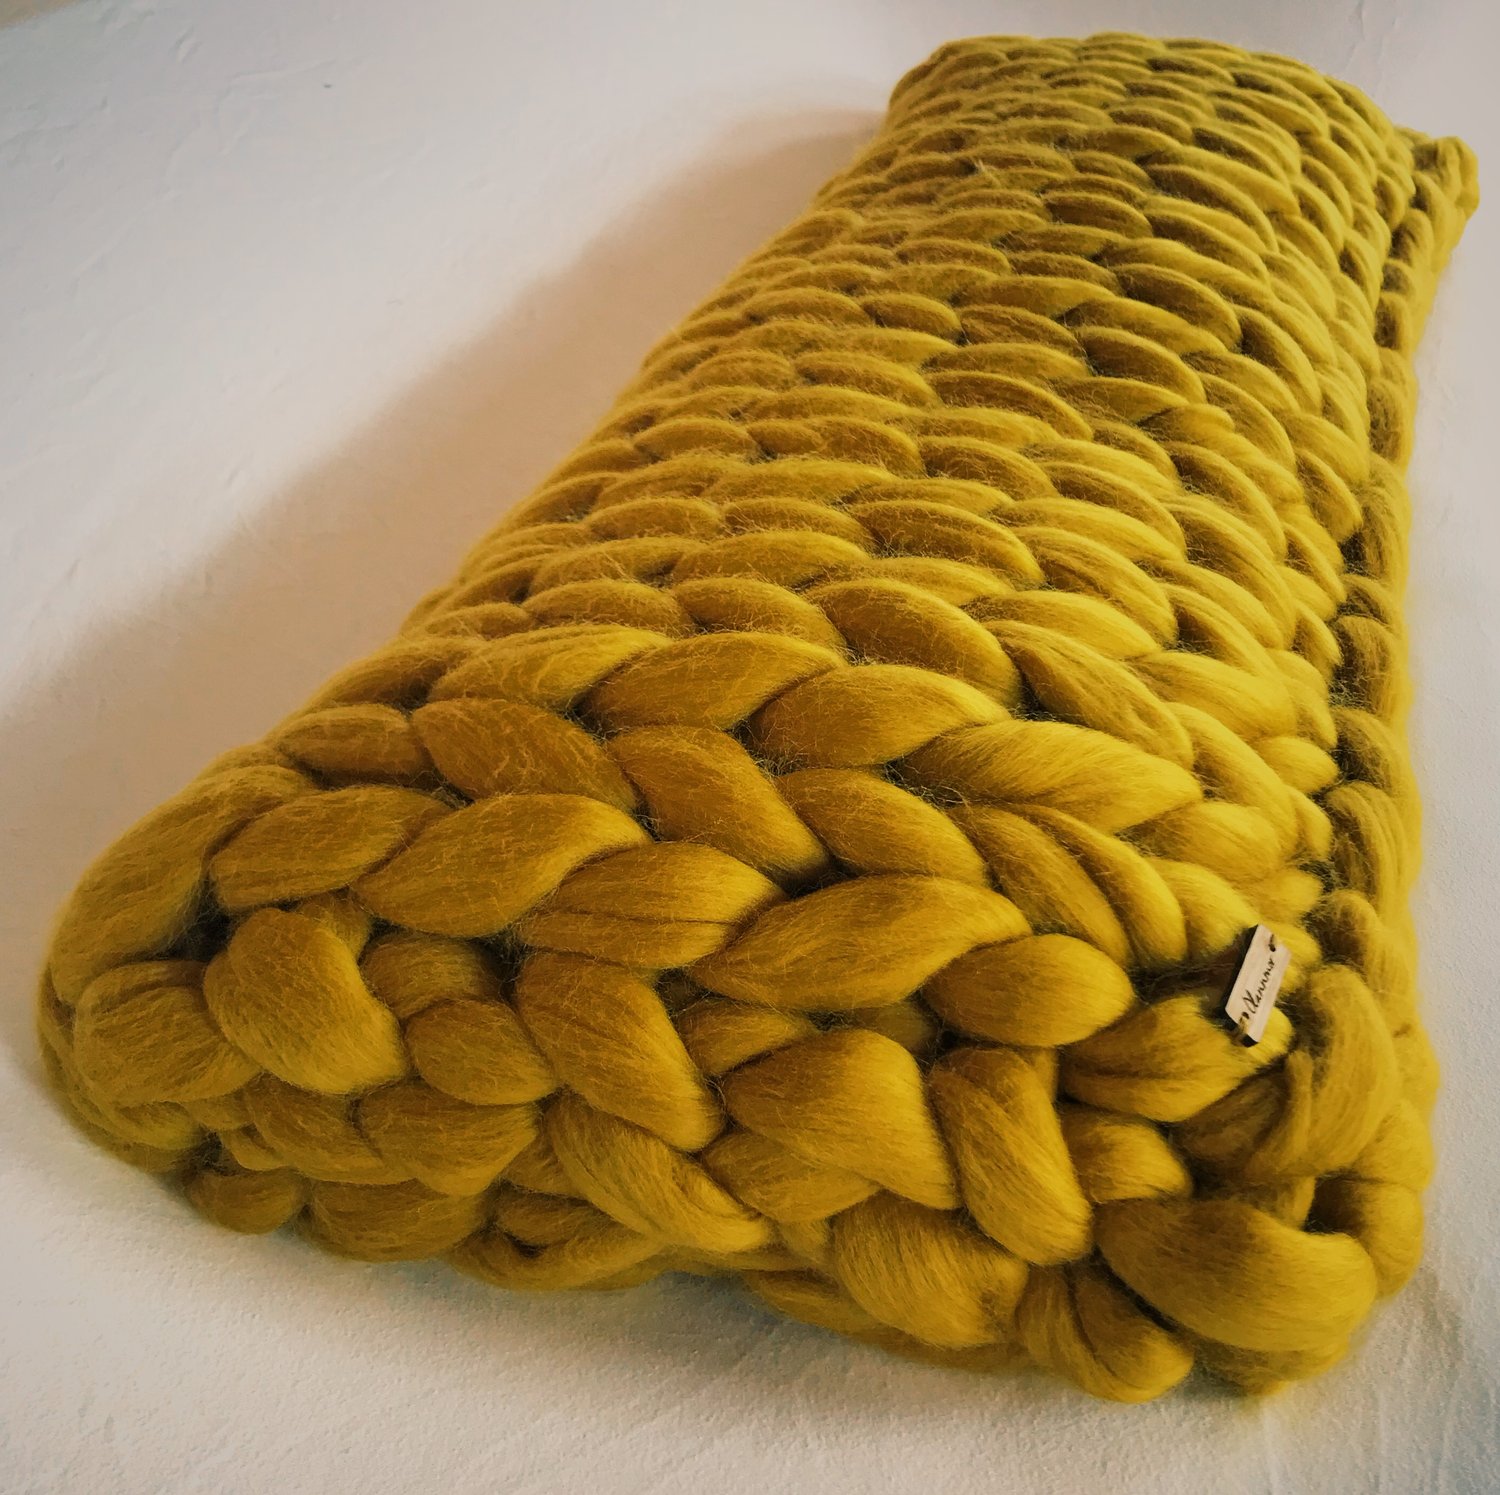 Olannmor - Shop chunky knits, kits for weaving and knitting and chunky wool